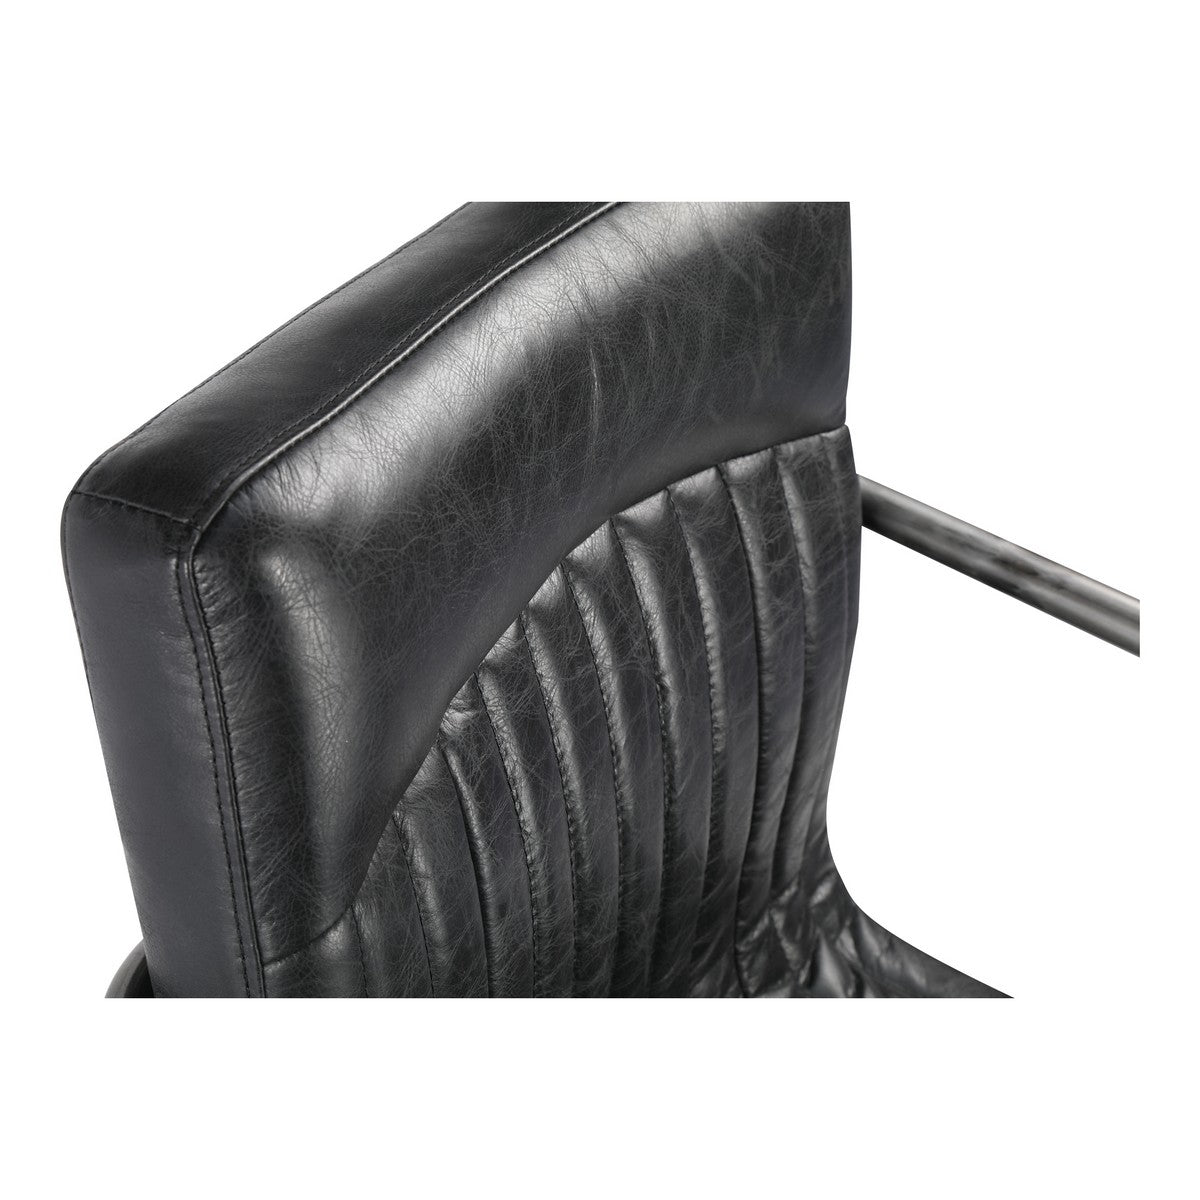 Moe's Home Collection Ansel Arm Chair Black-Set of Two - PK-1052-02